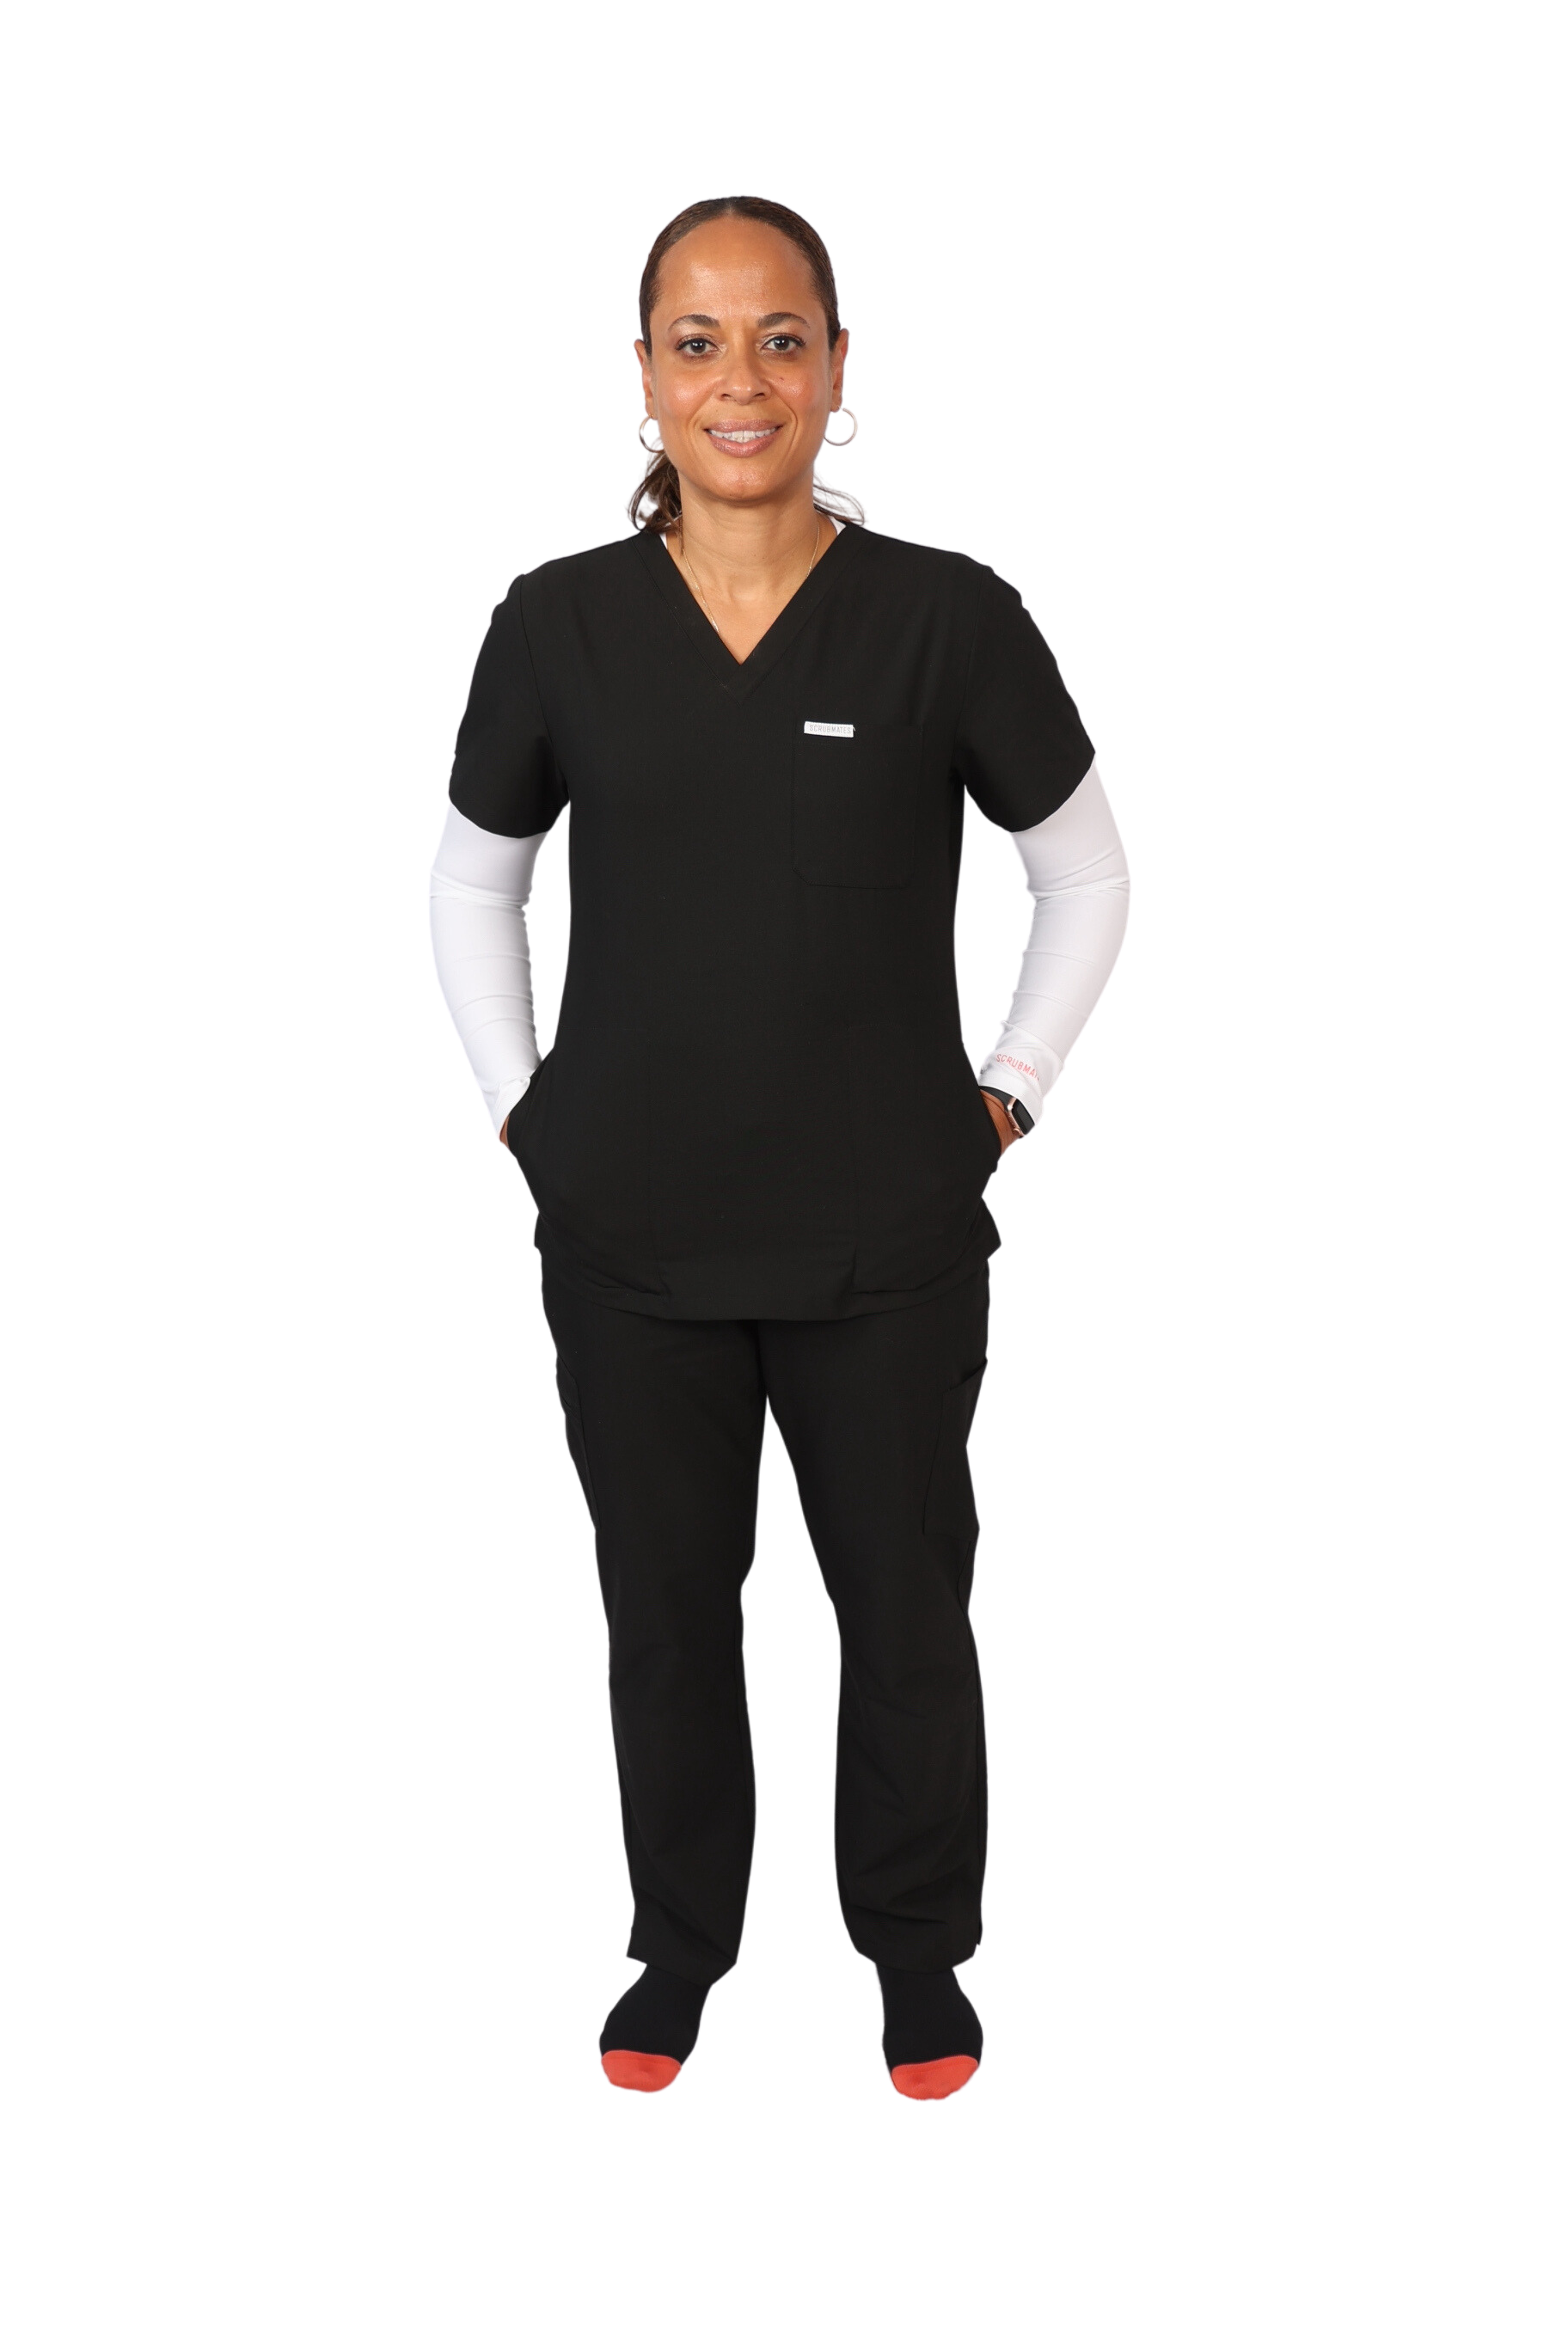 work medical and dental uniform Scrubmates classic straight leg black scrub pants for women made to pair perfectly with our classic scrub top. Our exclusive design is trend-forward while still delivering timeless and professional style. Made from a superior quality polyester/rayon/spandex fabric mix, these pants offer unparalleled all-day comfort. Designed to be flattering at every angle. Our thoughtful and innovative design offers six deep pants pockets best scrubs for women figs scrubs